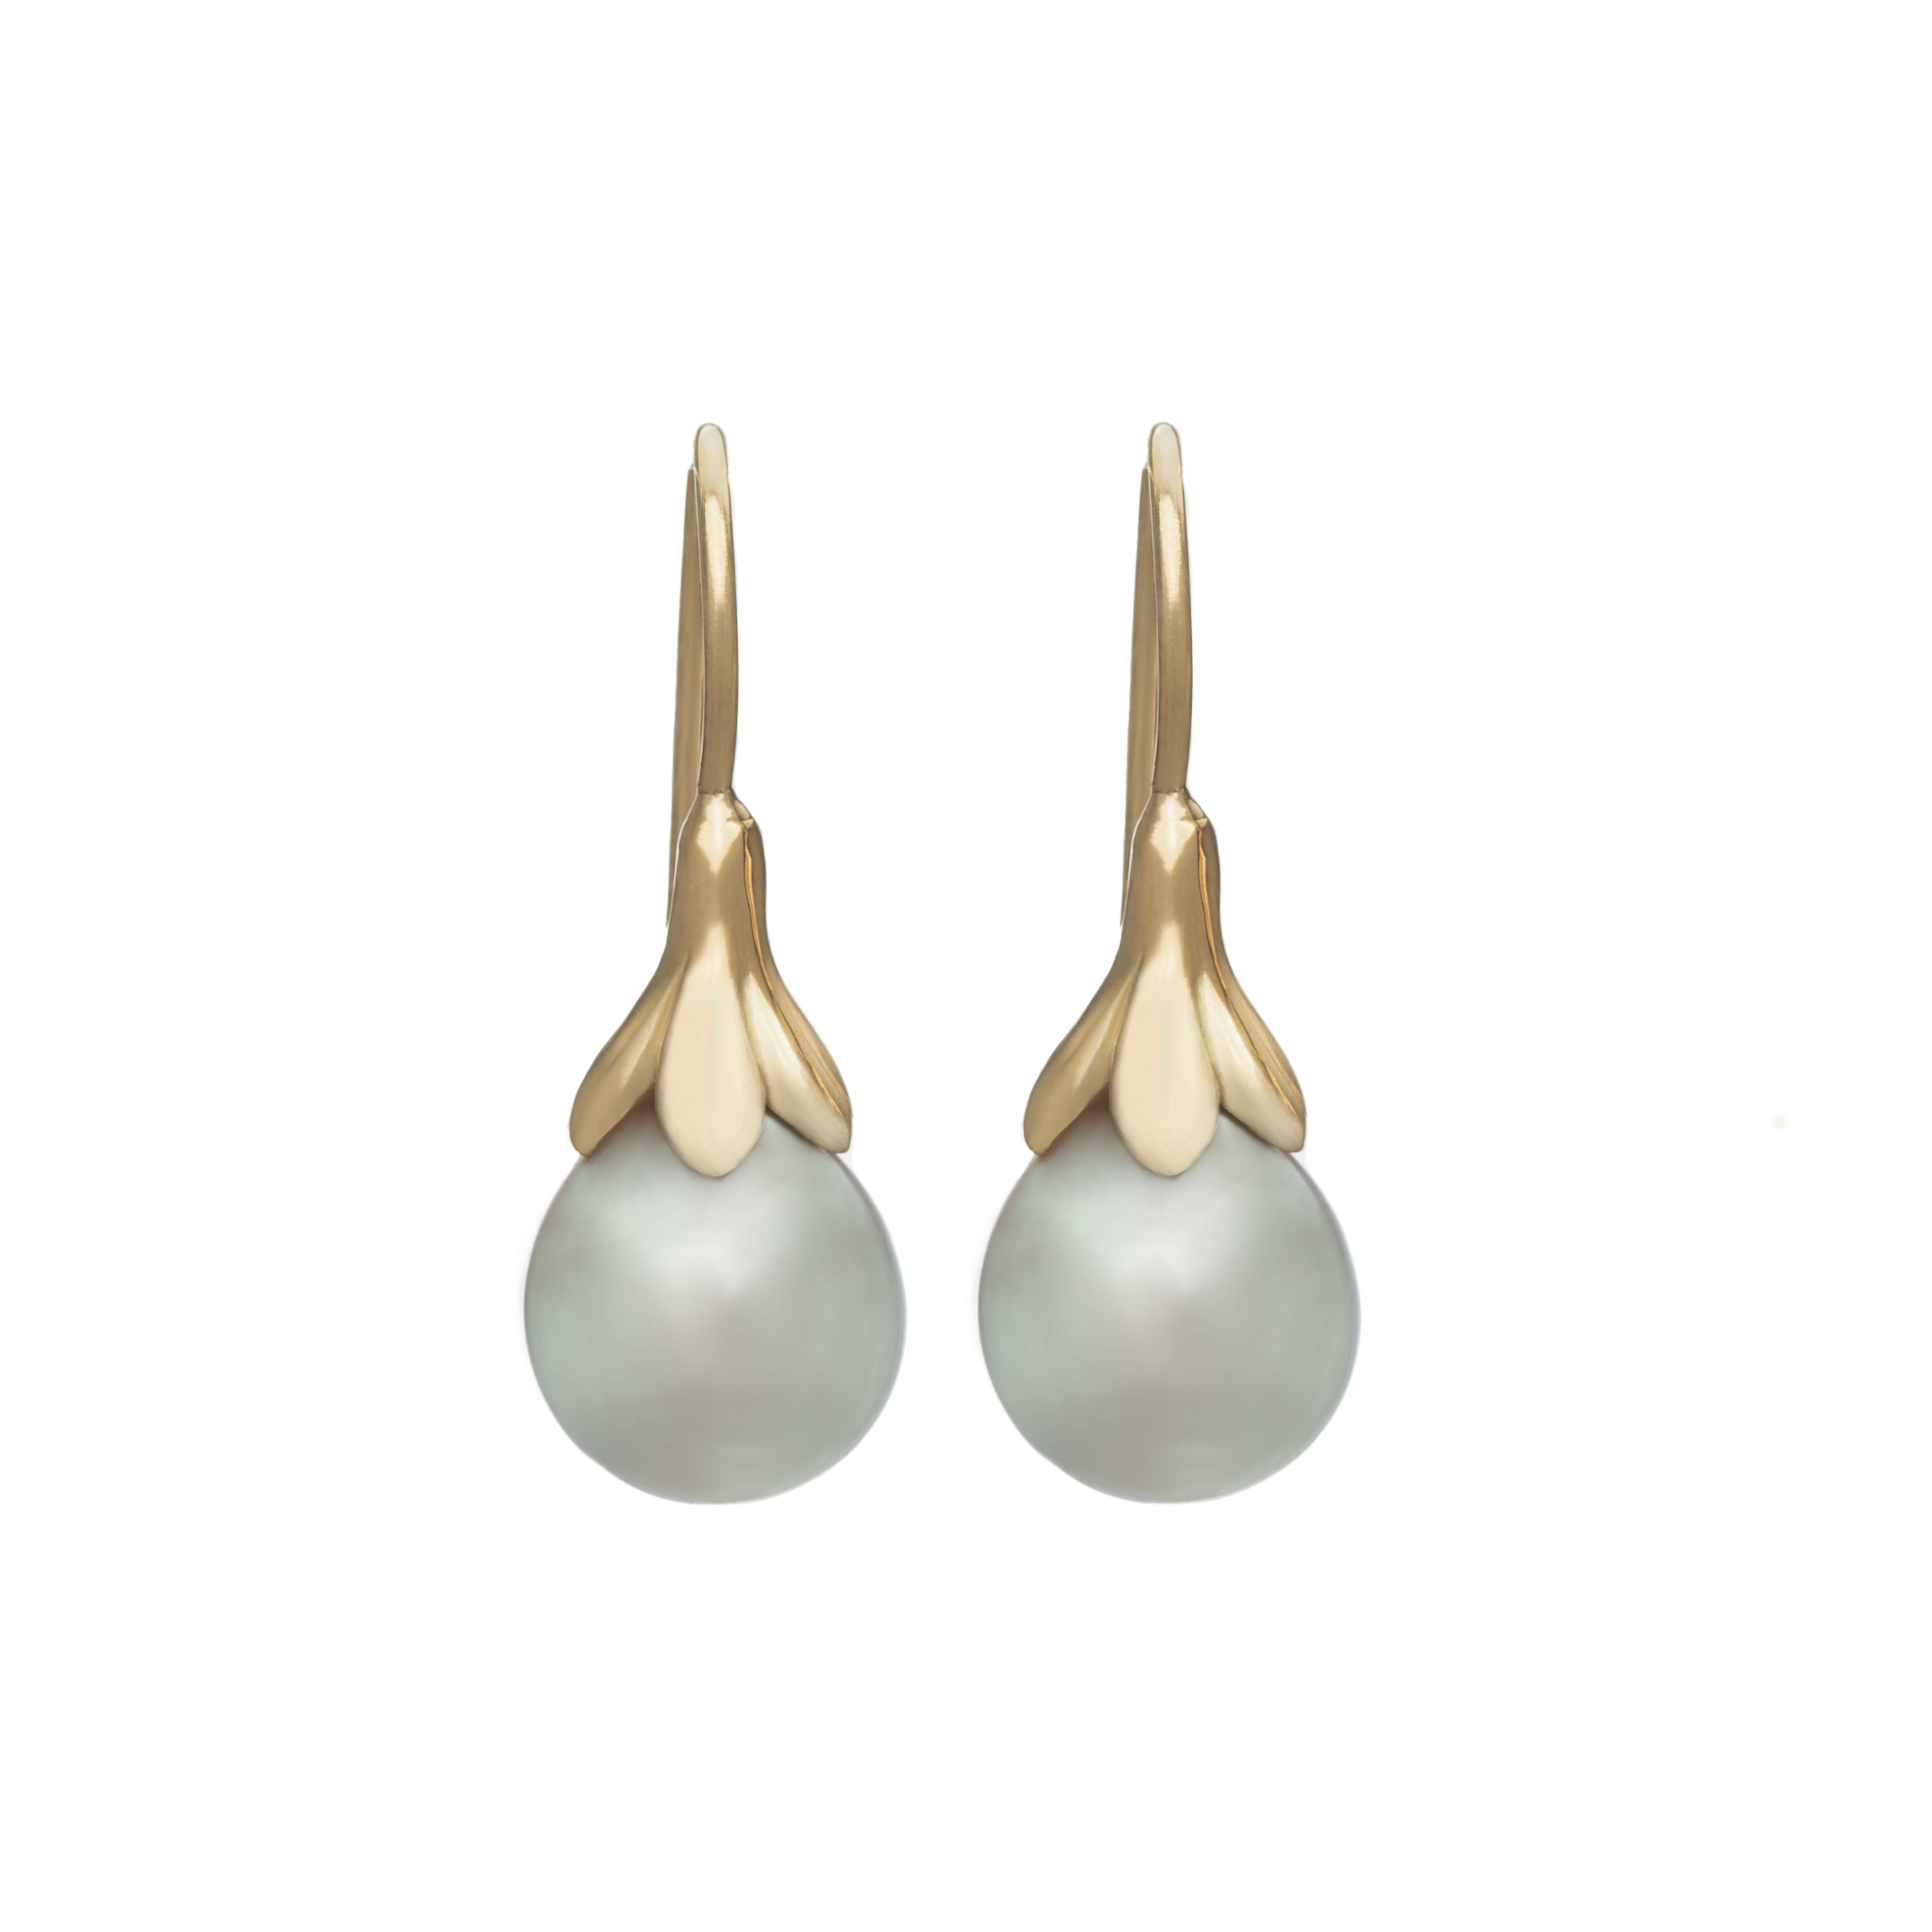 Christina Malle Fairmined Gold Berry Leaf Earrings, with Sea of Cortez Pearls. The Flora Collection